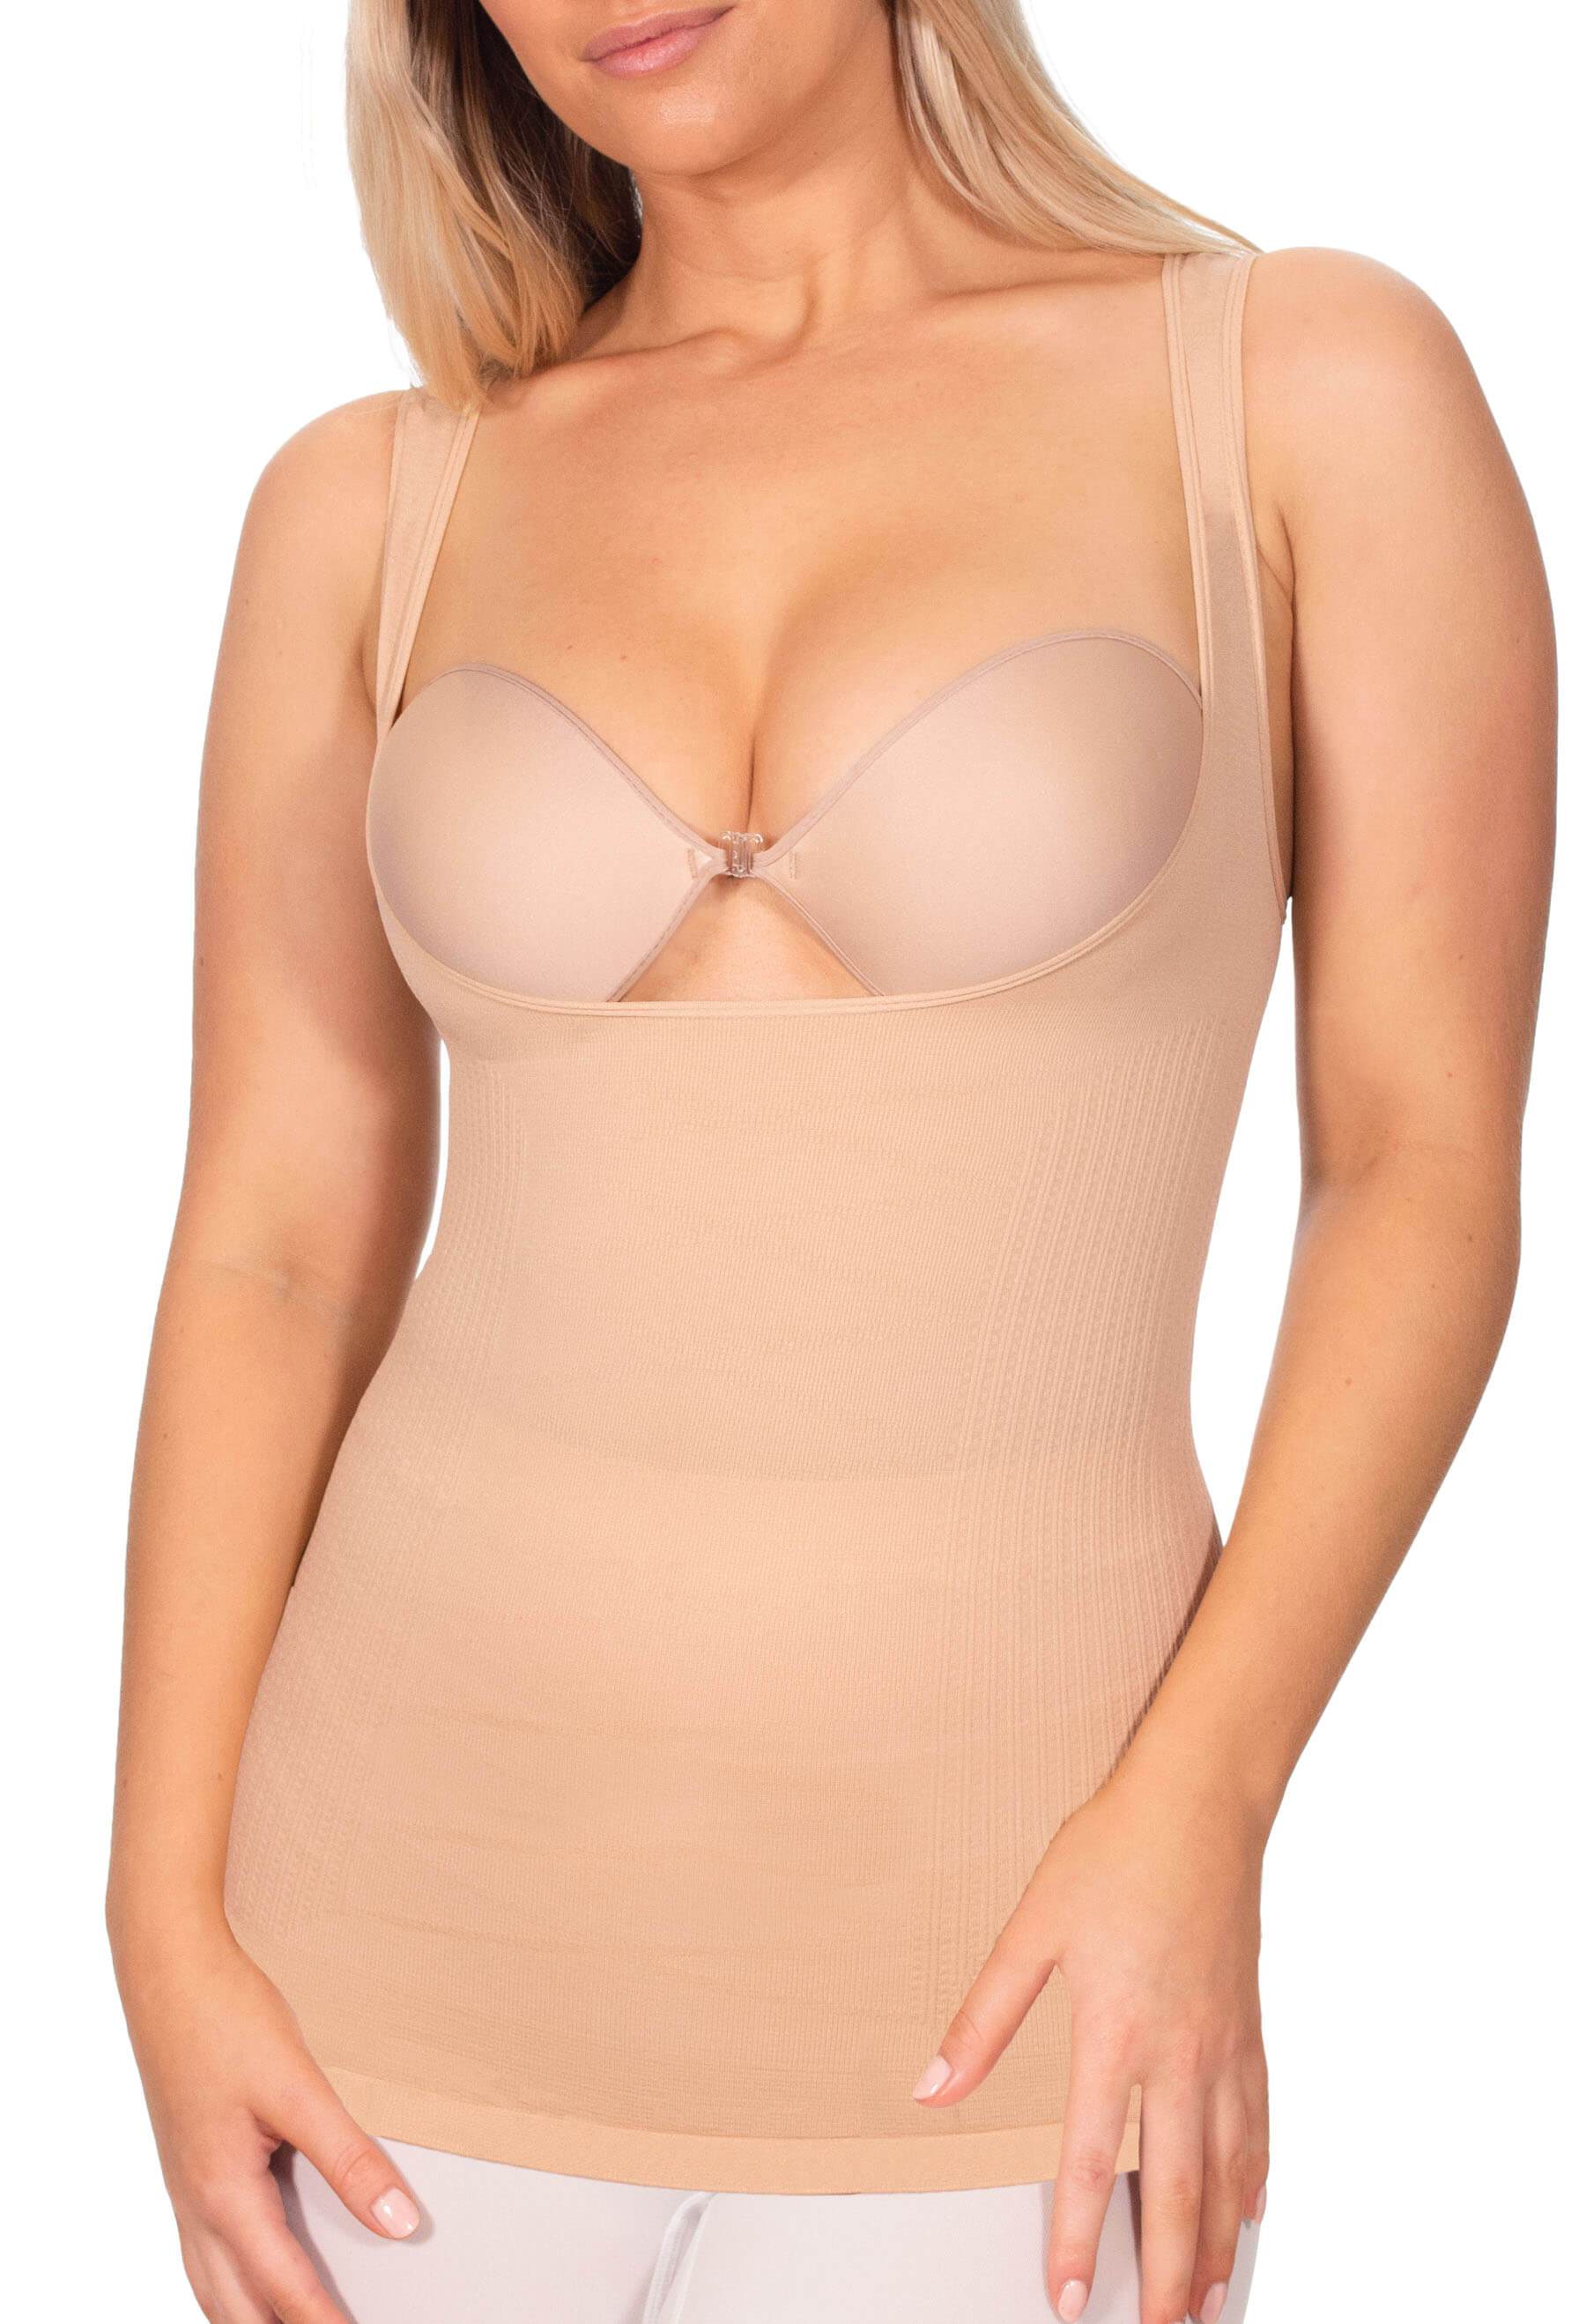 Ladies Firm Control Open-Bust Dress Shaper. (6 Pack) - Helps